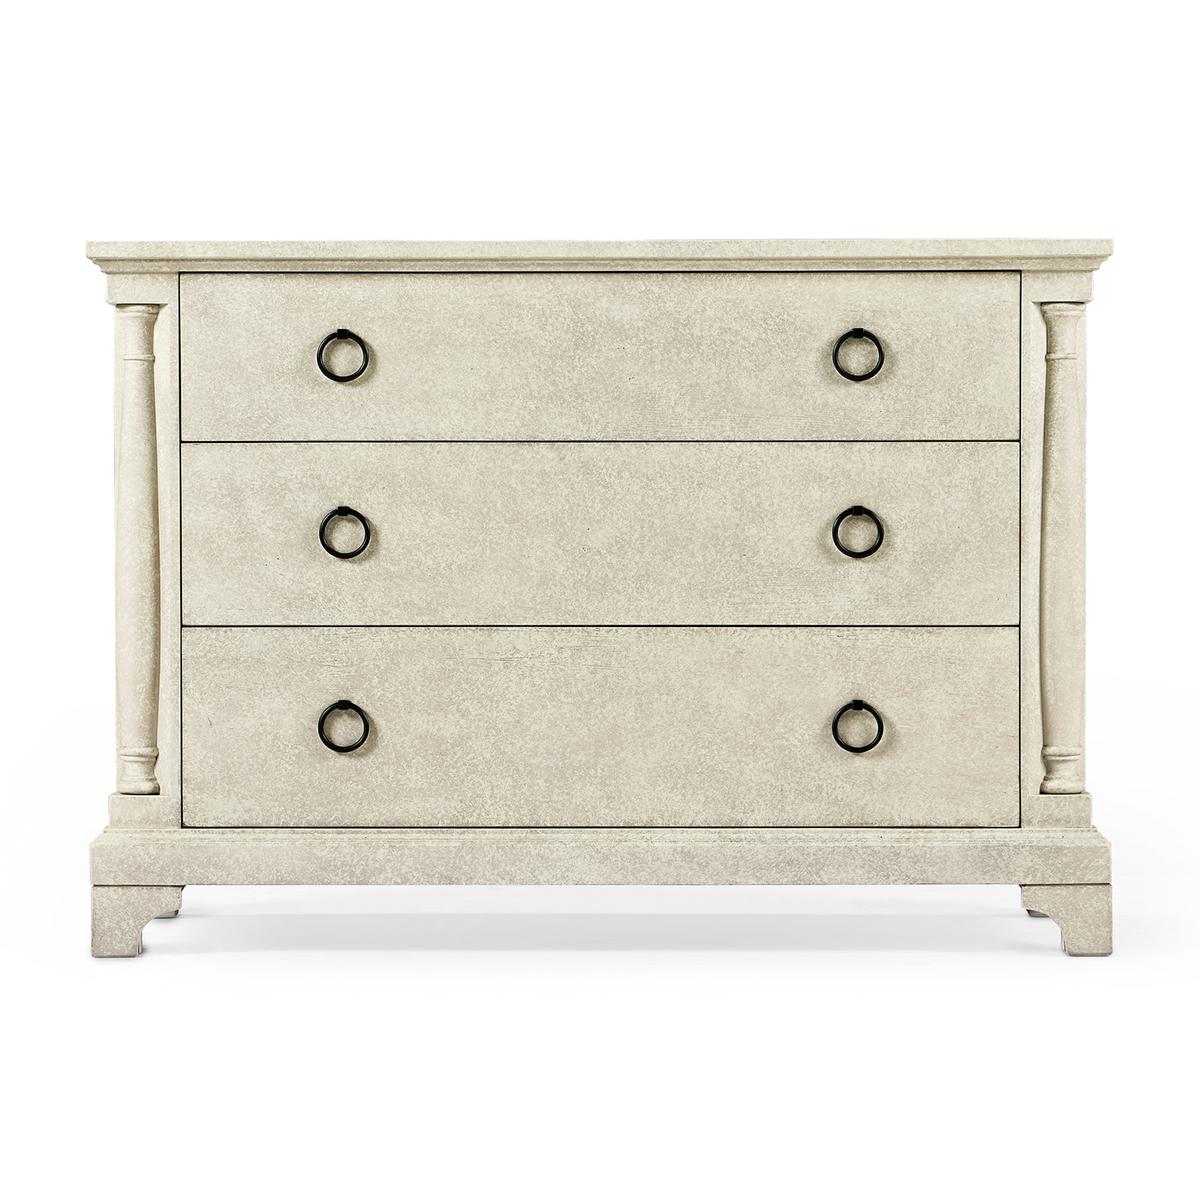 French Country rustic chest of drawers in our whitewash driftwood finish with three drawers, column form styles, with a stepped pedestal base on bracket feet and brass ring handles.

Dimensions: 47.25